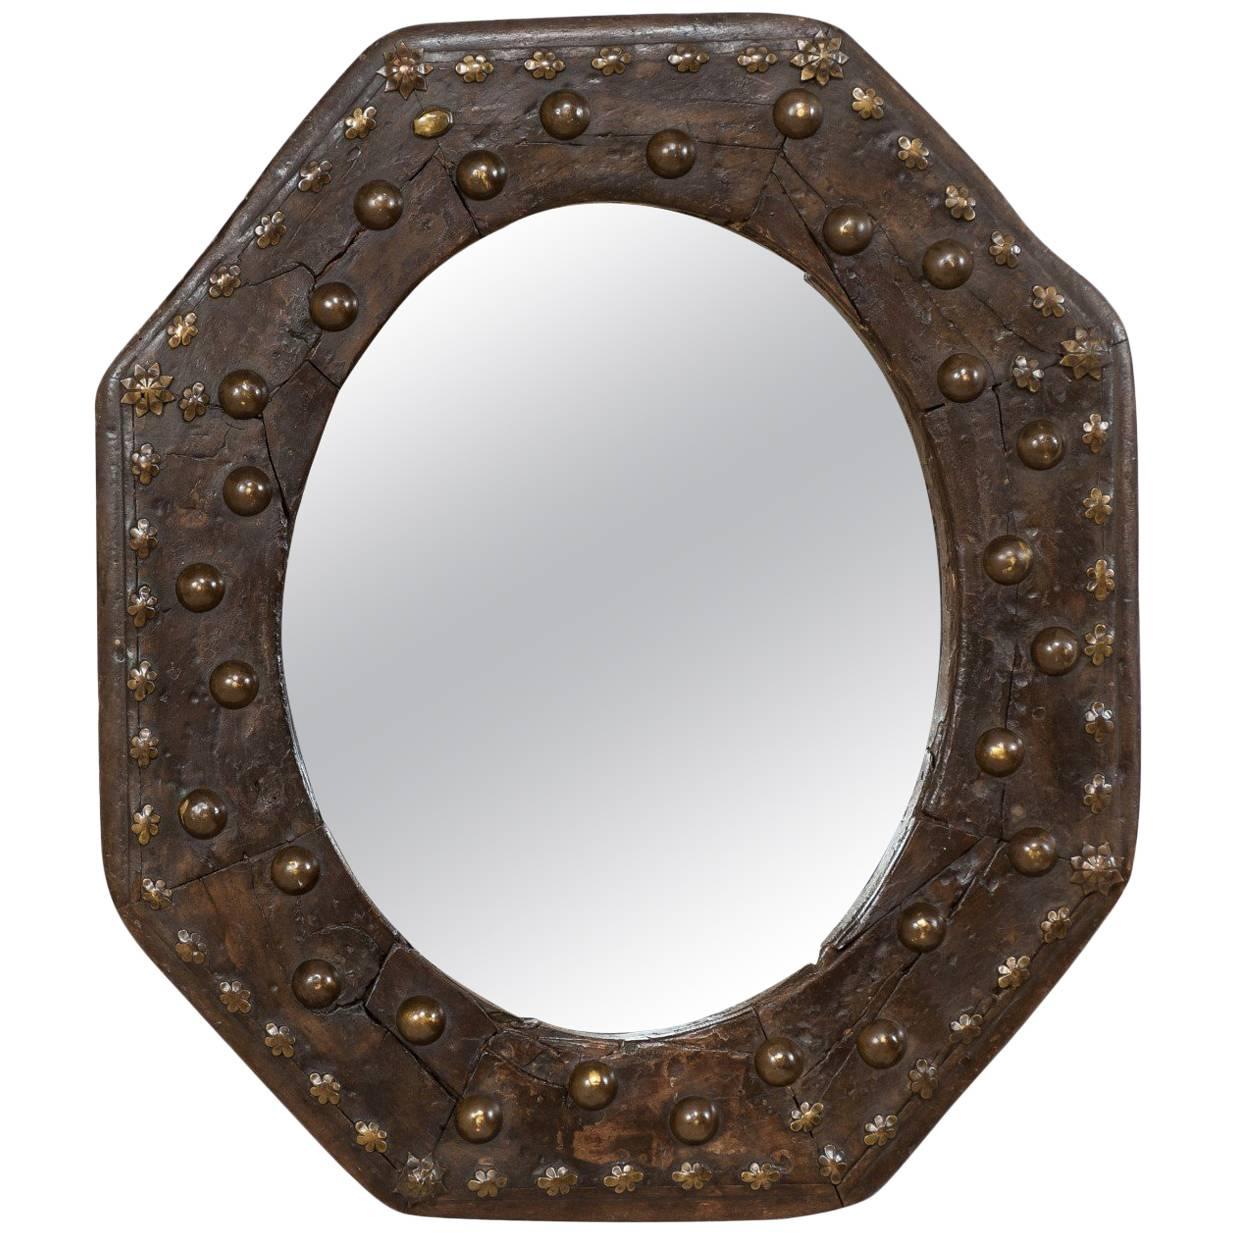 Spanish 19th Century Octagonal Wood Mirror with Flower Accents and Nail Heads